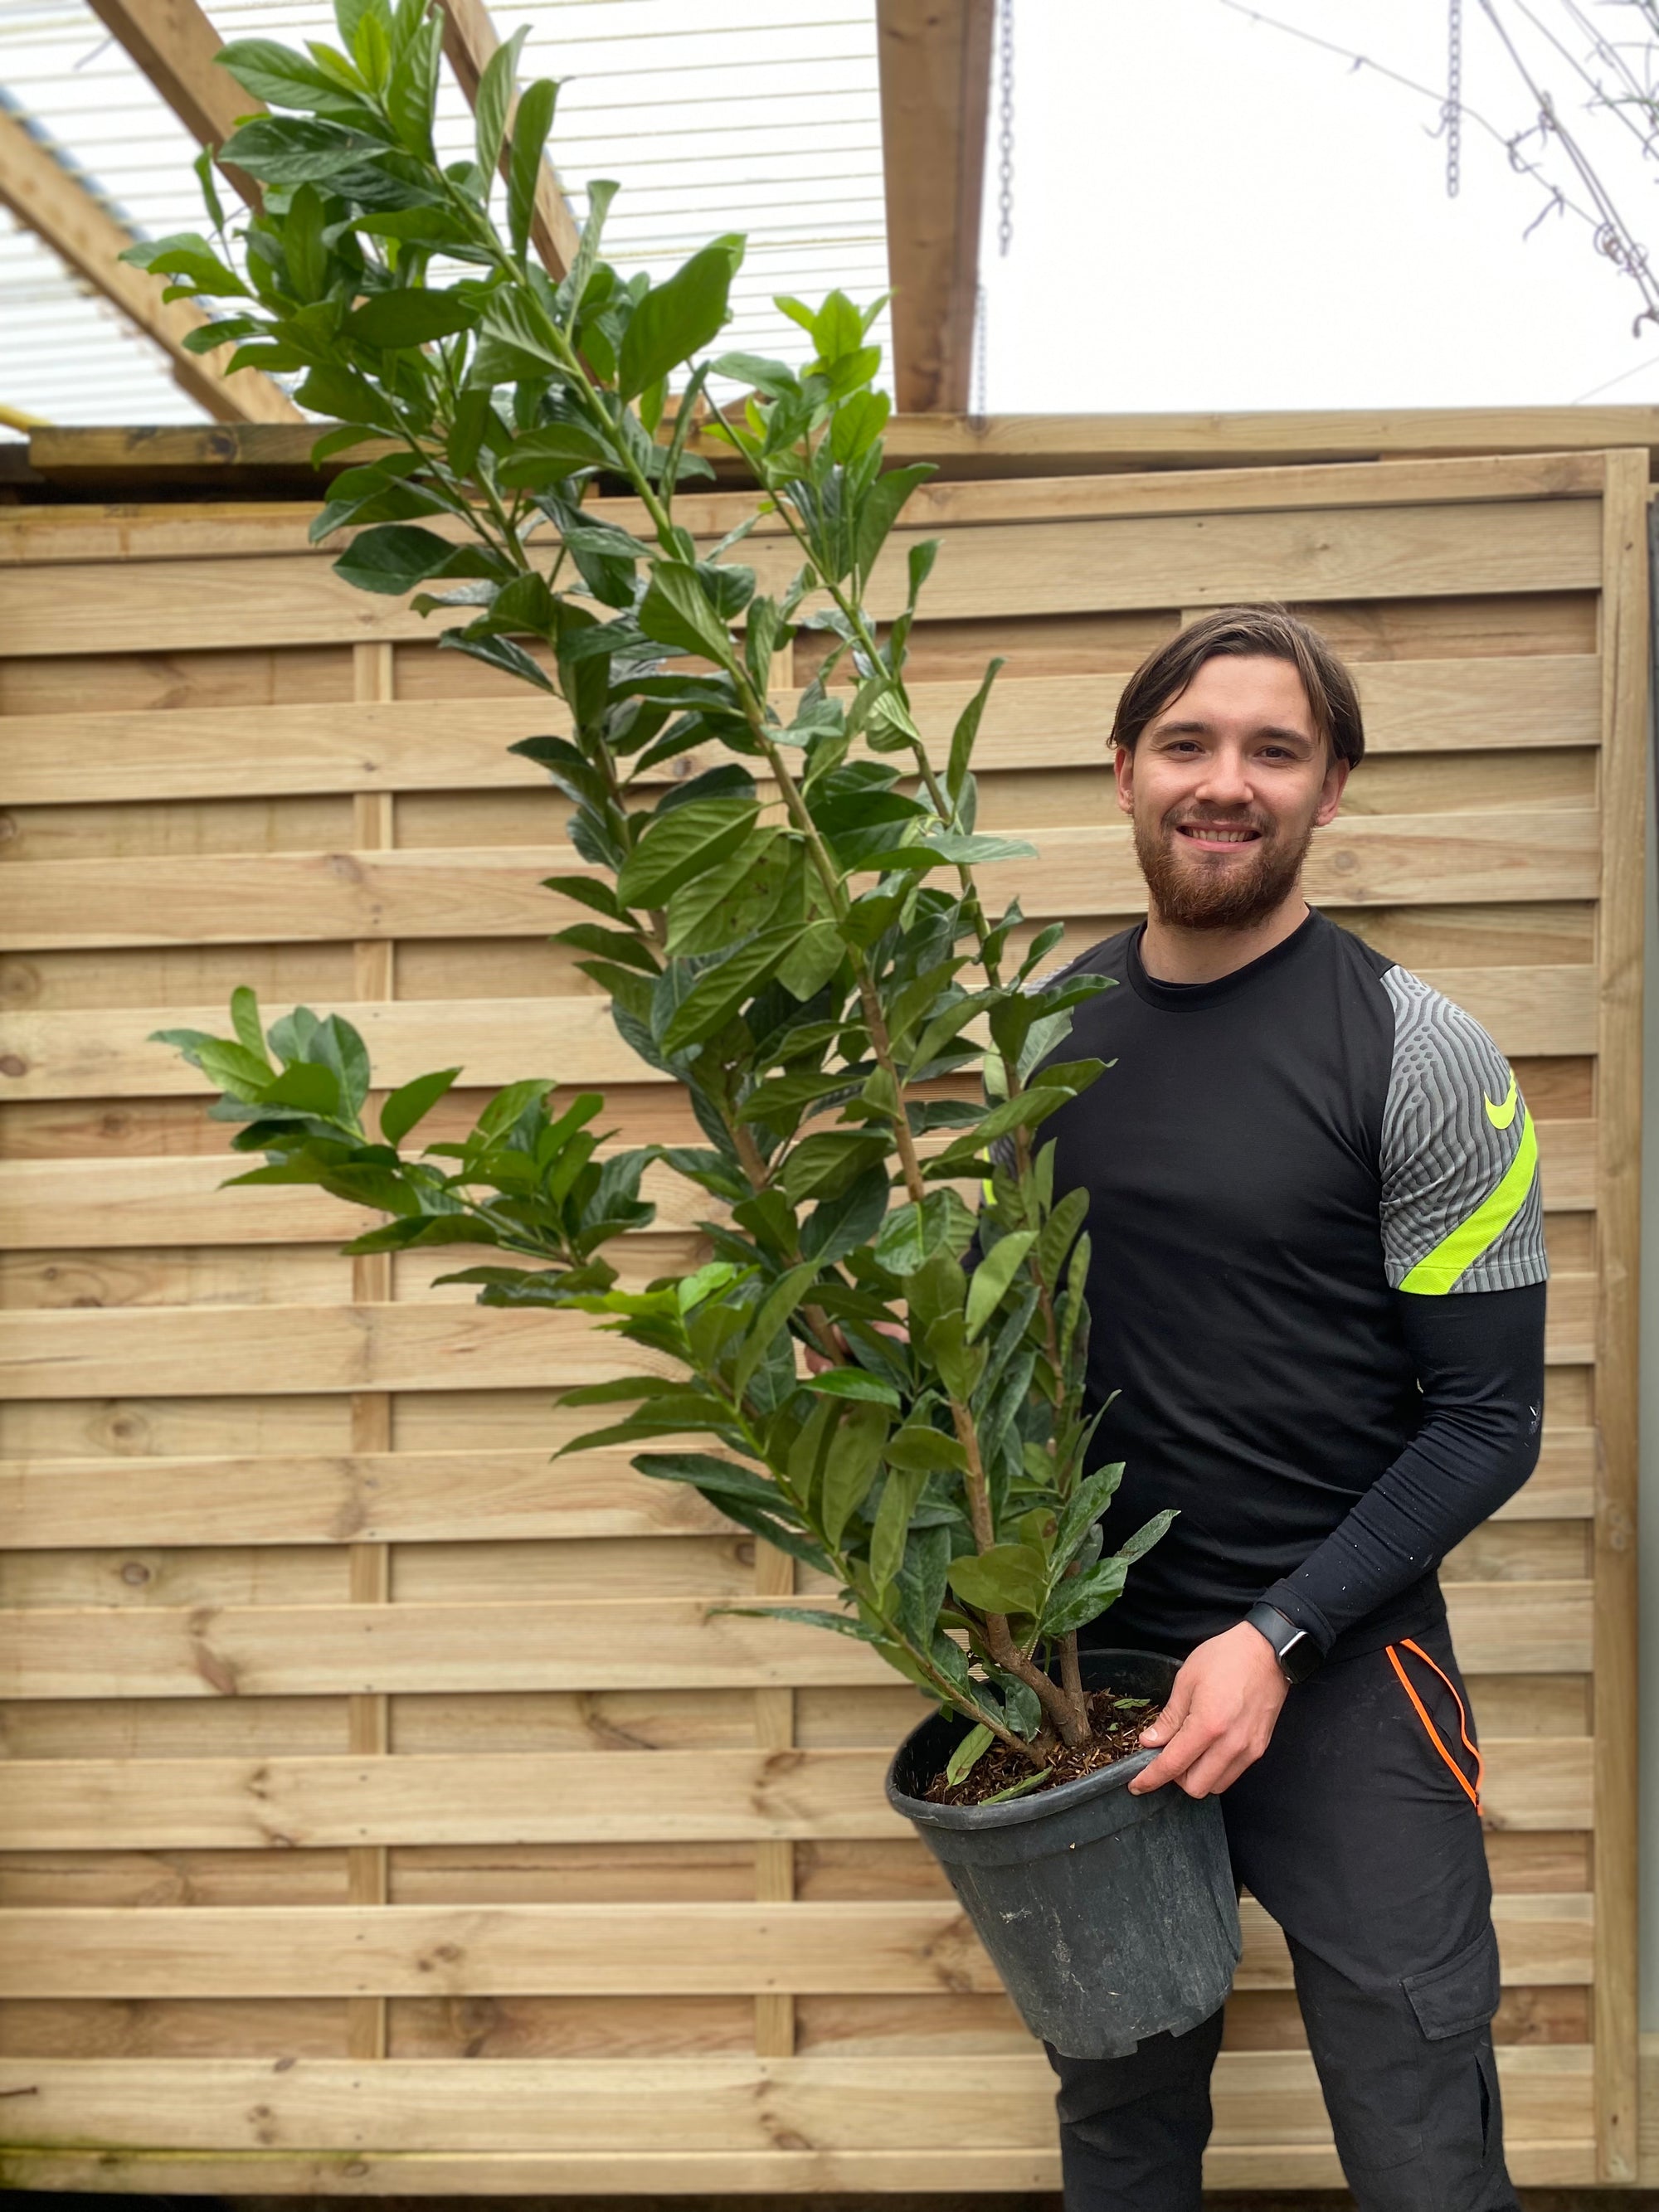 BLACK FRIDAY MEGA DEAL: 5-6ft Potted Cherry Laurel Hedge Plants 150-180cm (Multi-Buy Offers Available)